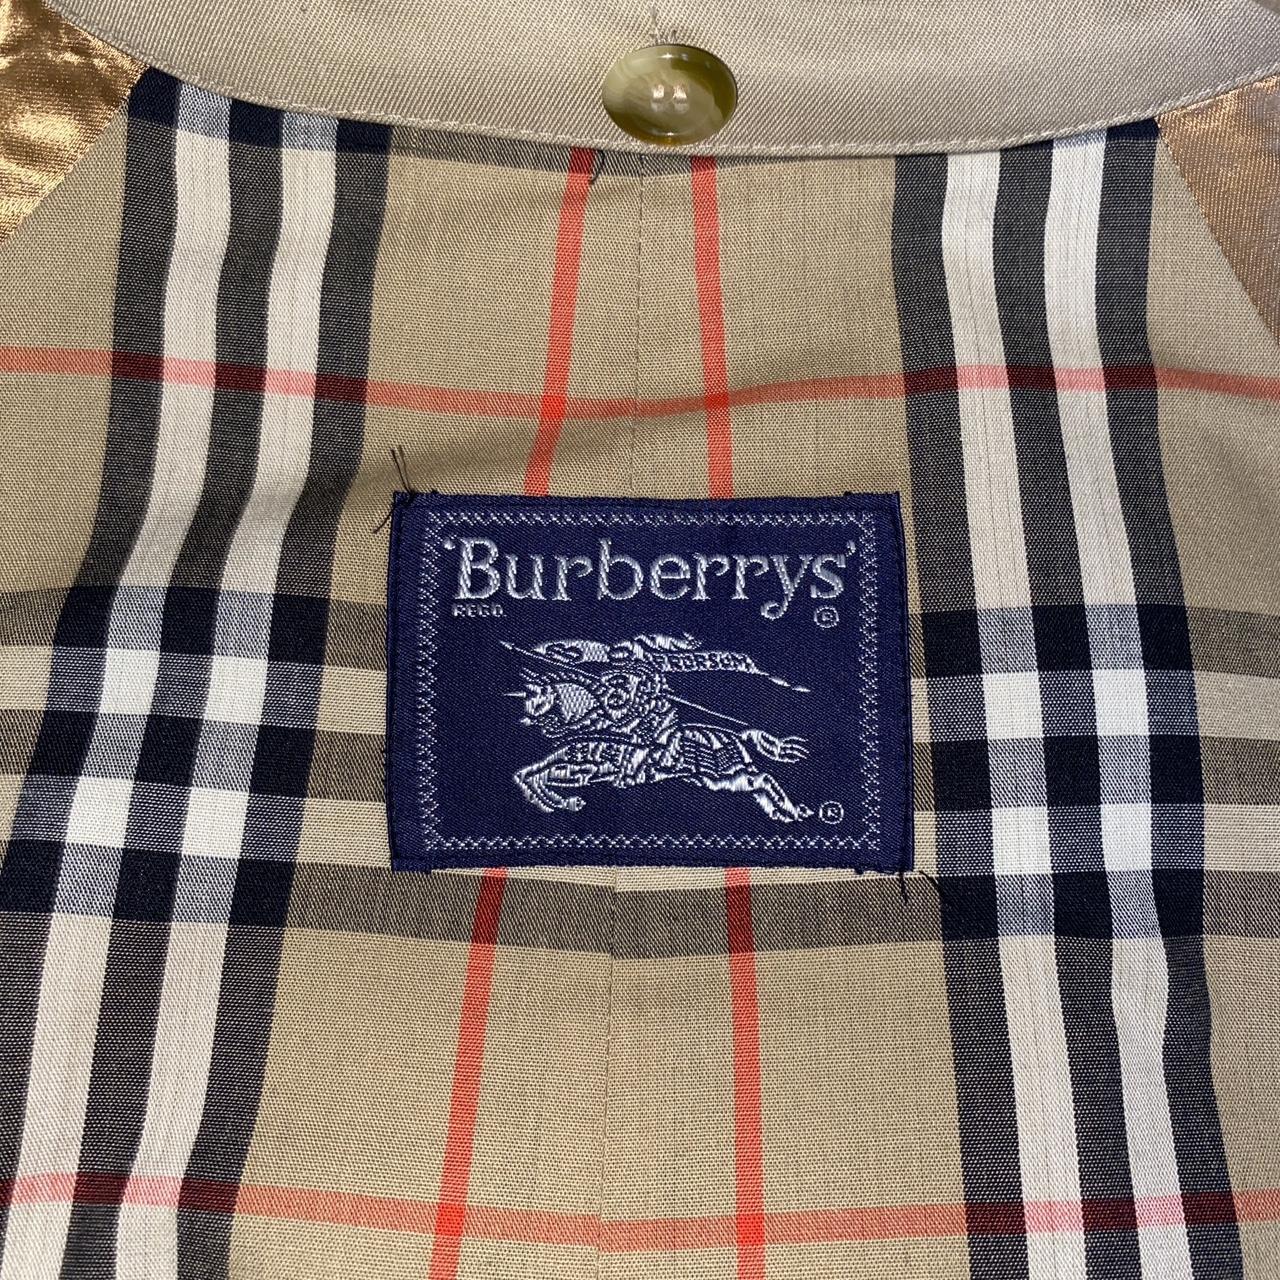 Vintage 80s BURBERRY trench coat! Size is 42R, fits... - Depop